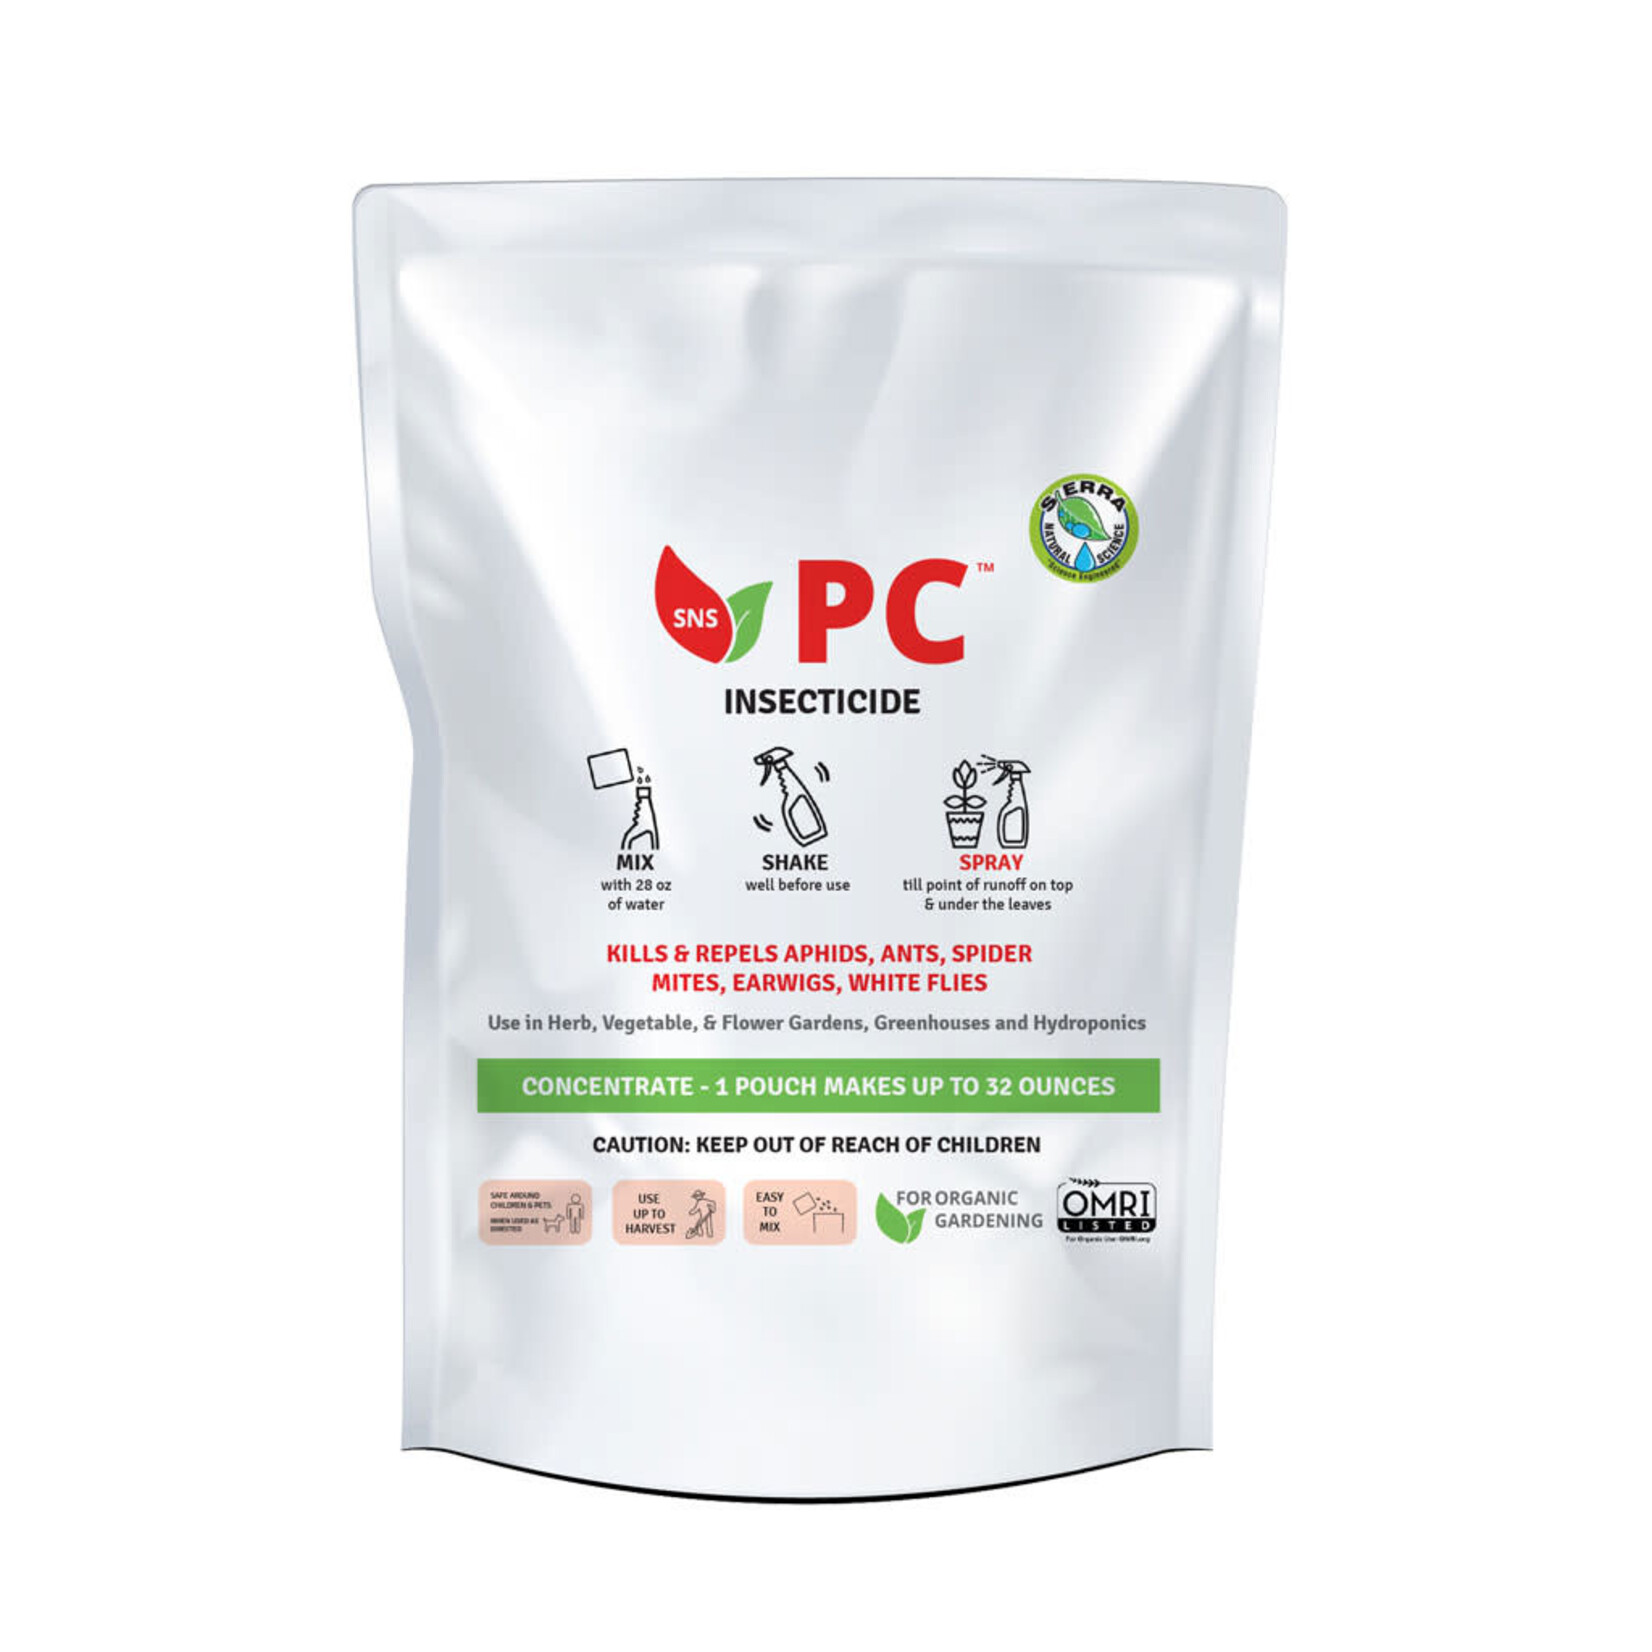 SNS PC Insecticide Pouch